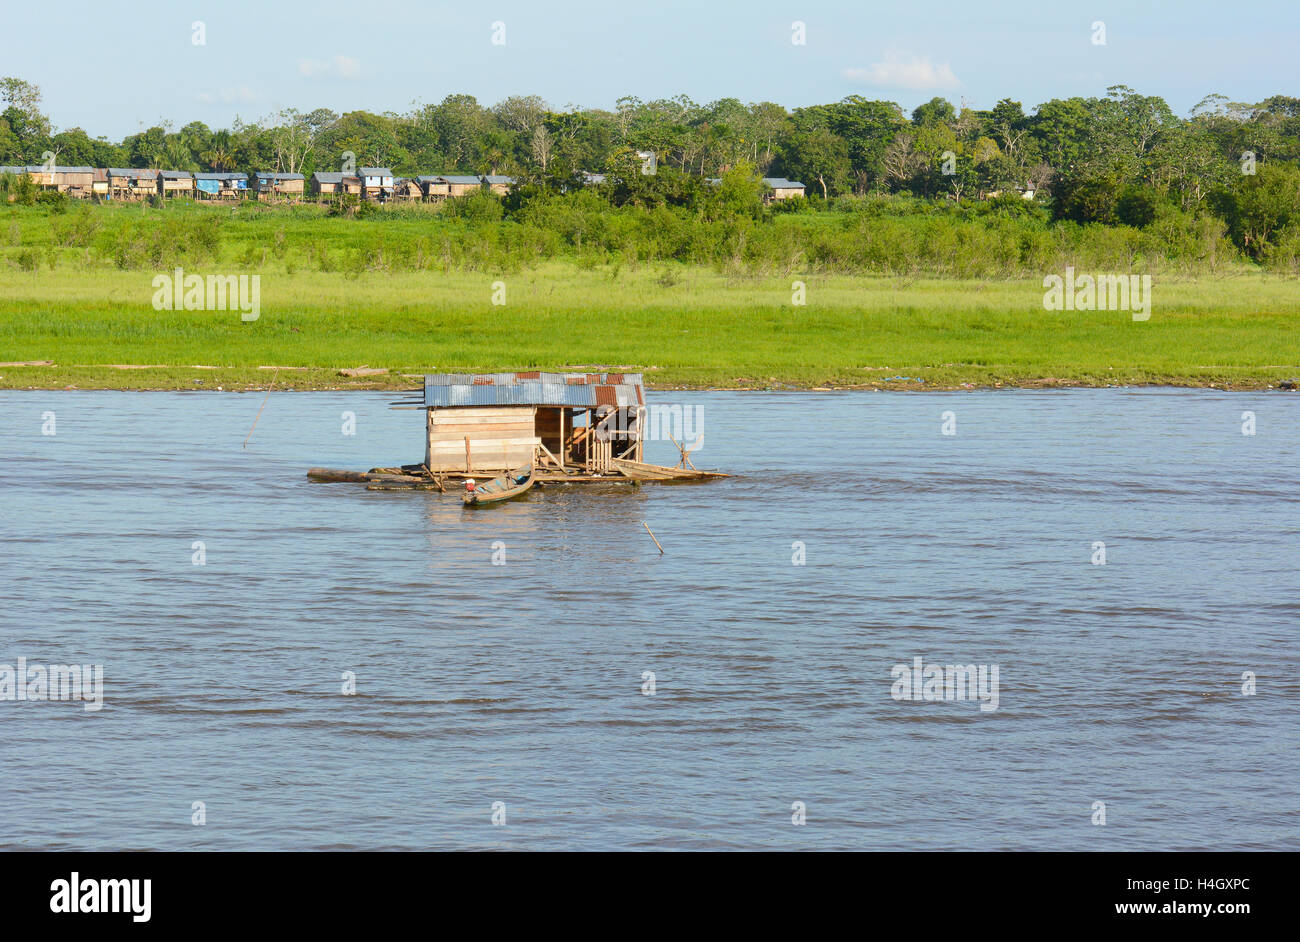 IQUITOS, PERU - OCTOBER 16, 2015: Floating Shack on the Itaya River. Fishing is a source of food and commerce in the Peruvian Am Stock Photo